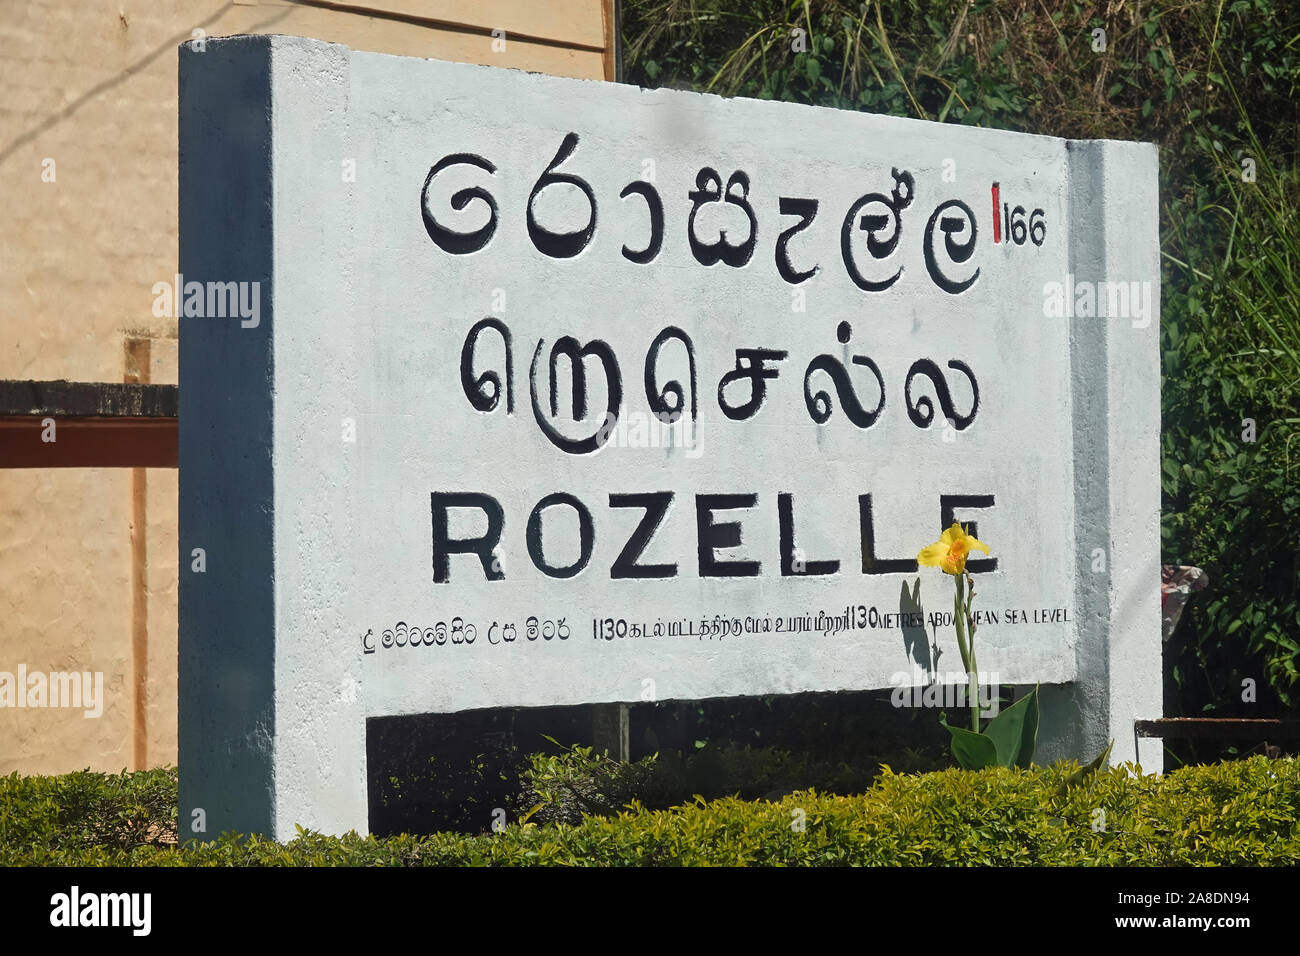 Rozelle Station, View From Train, Hill Country, Sri Lanka Stock Photo